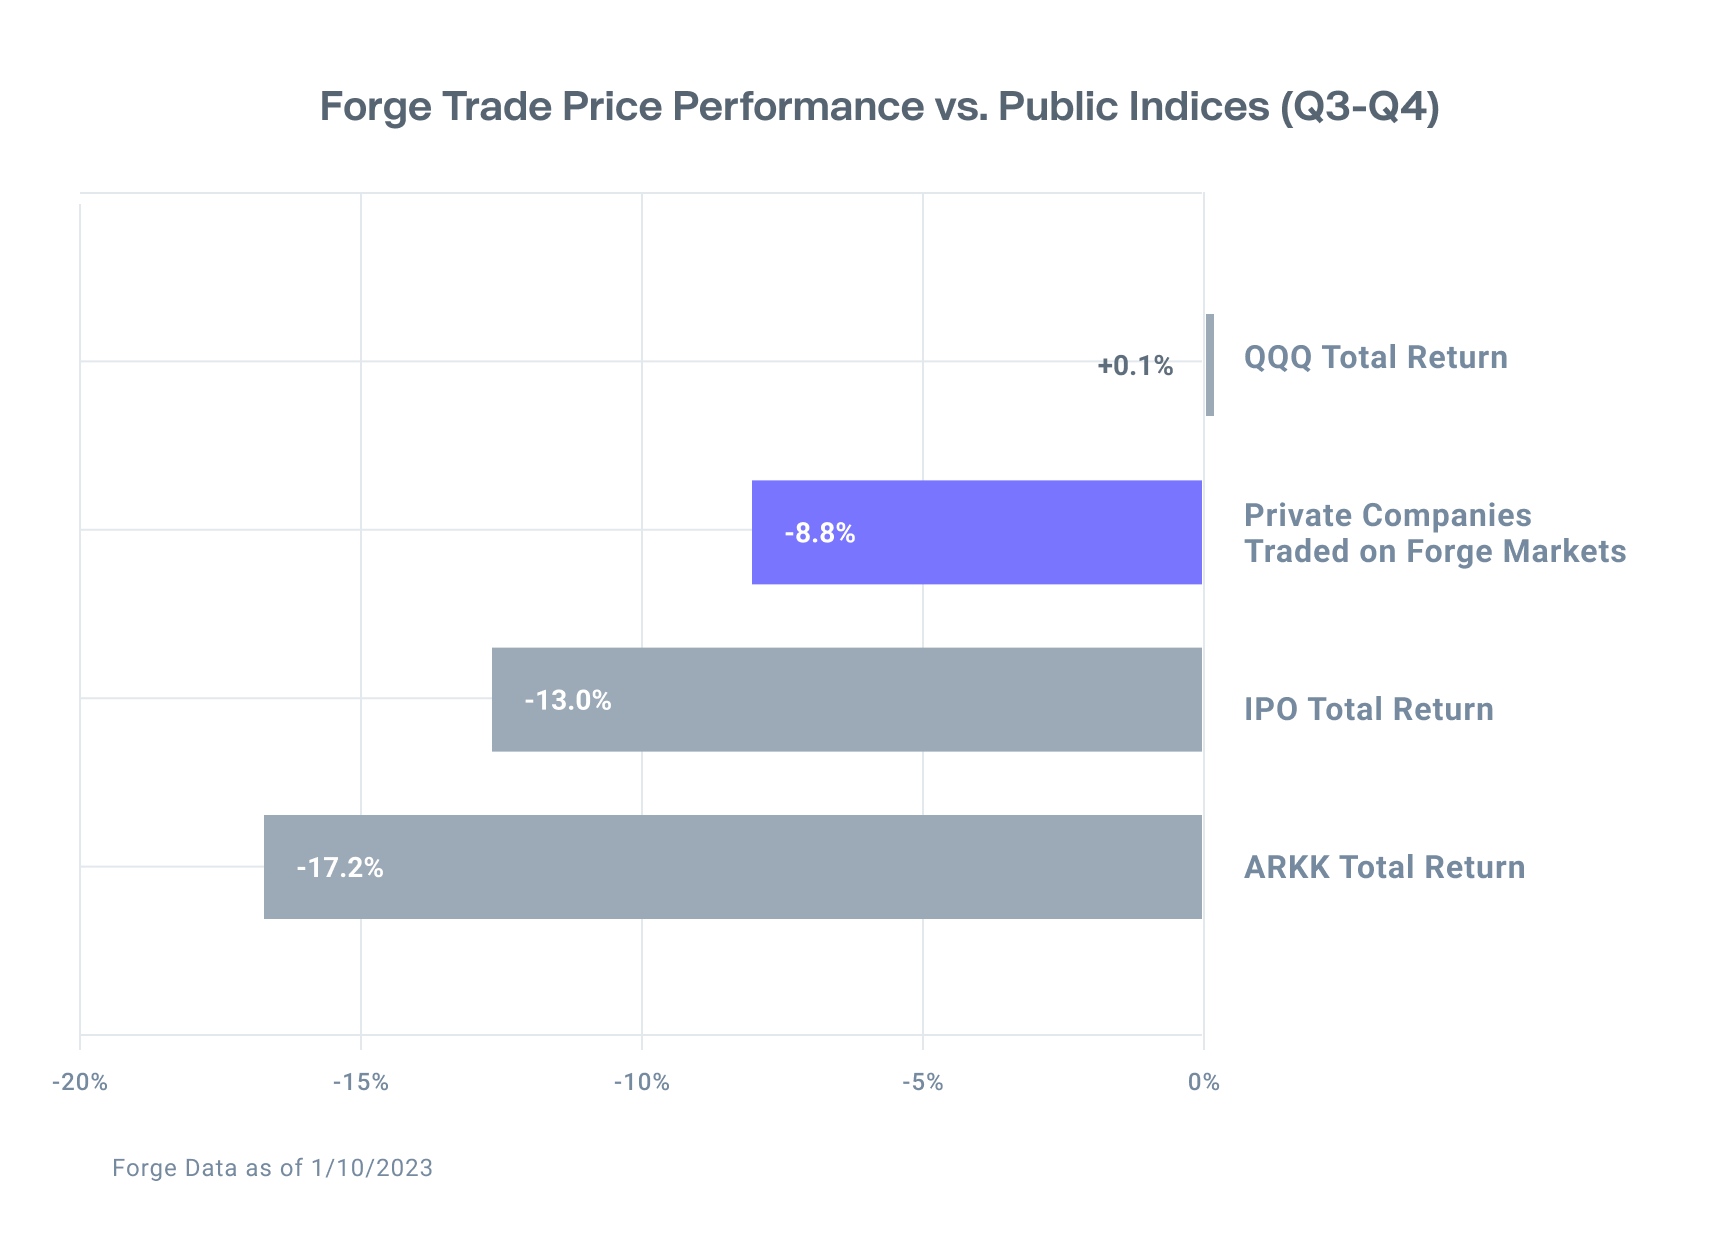 Chart shows Forge's trade price performance vs public indices Q3 and Q4